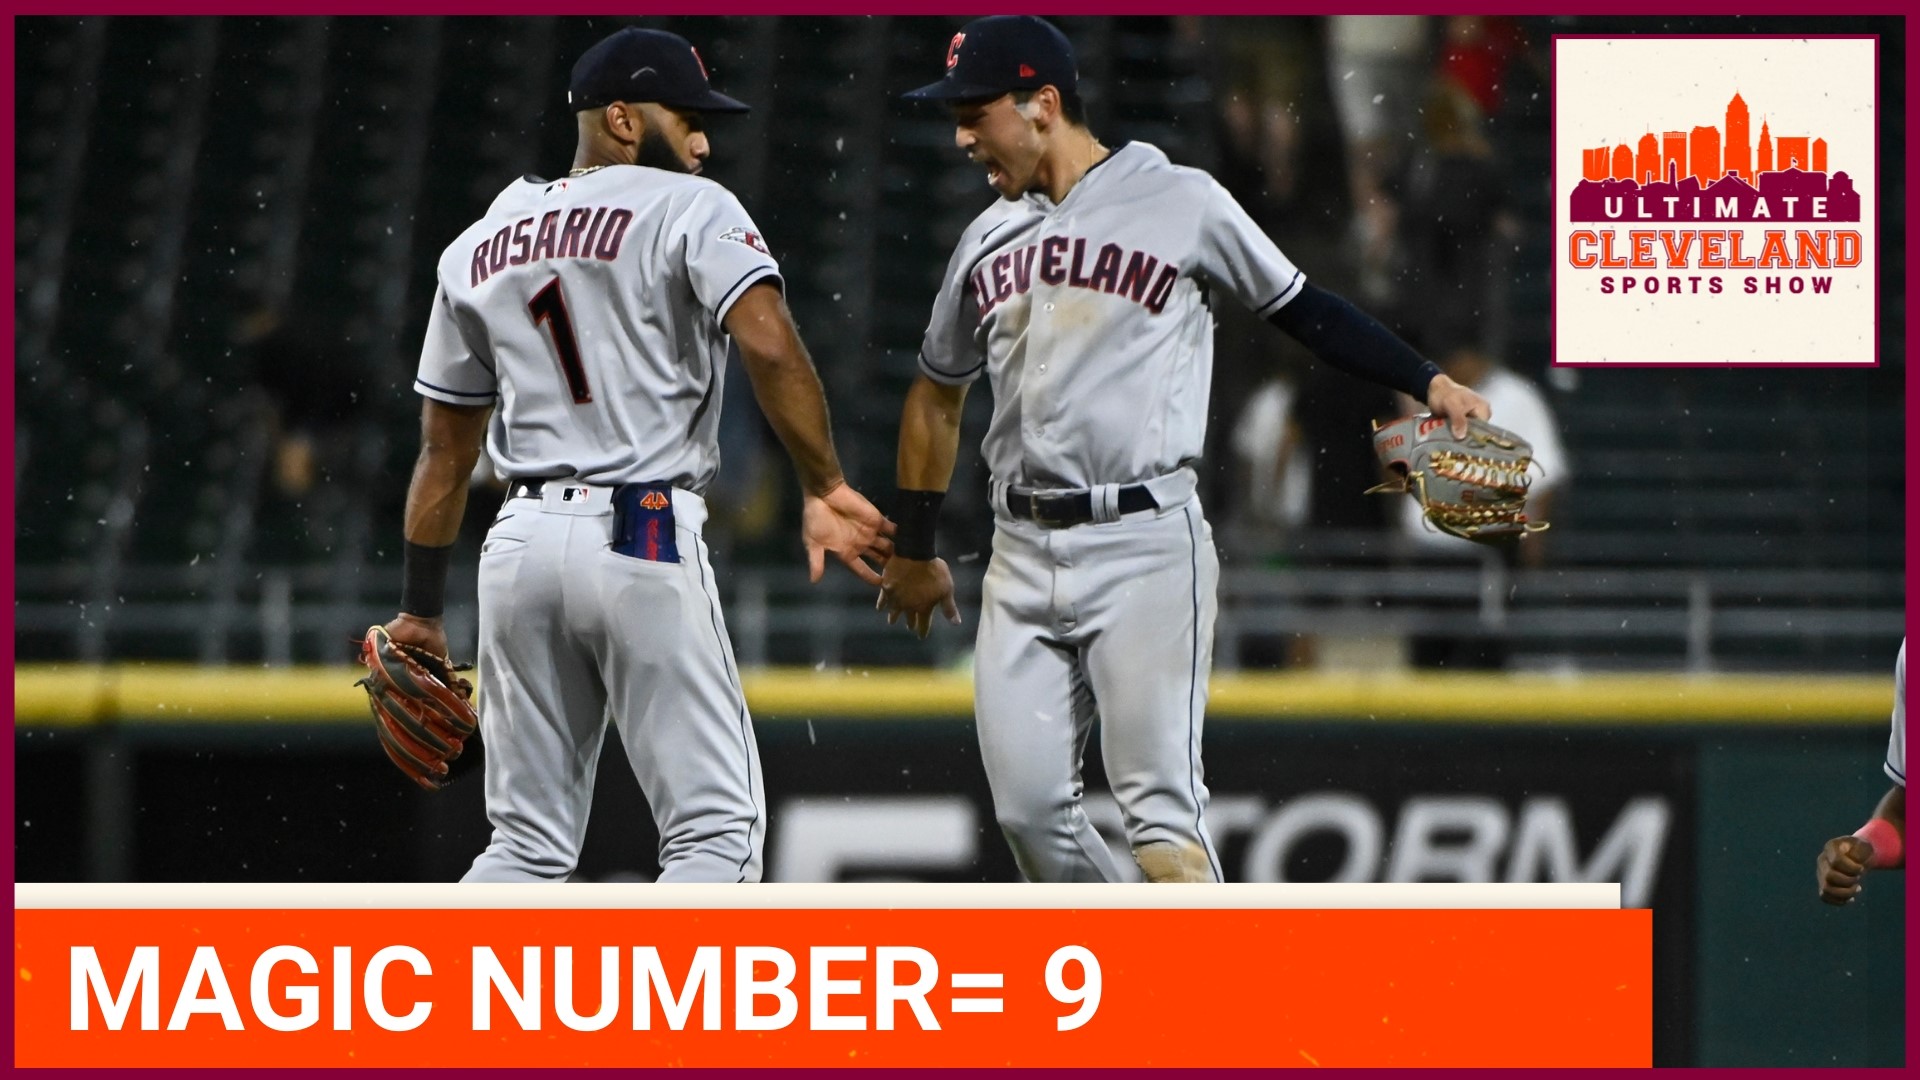 The Cleveland Guardians now lead the AL Central by five games. Are the Guardians a THREAT come playoff time?